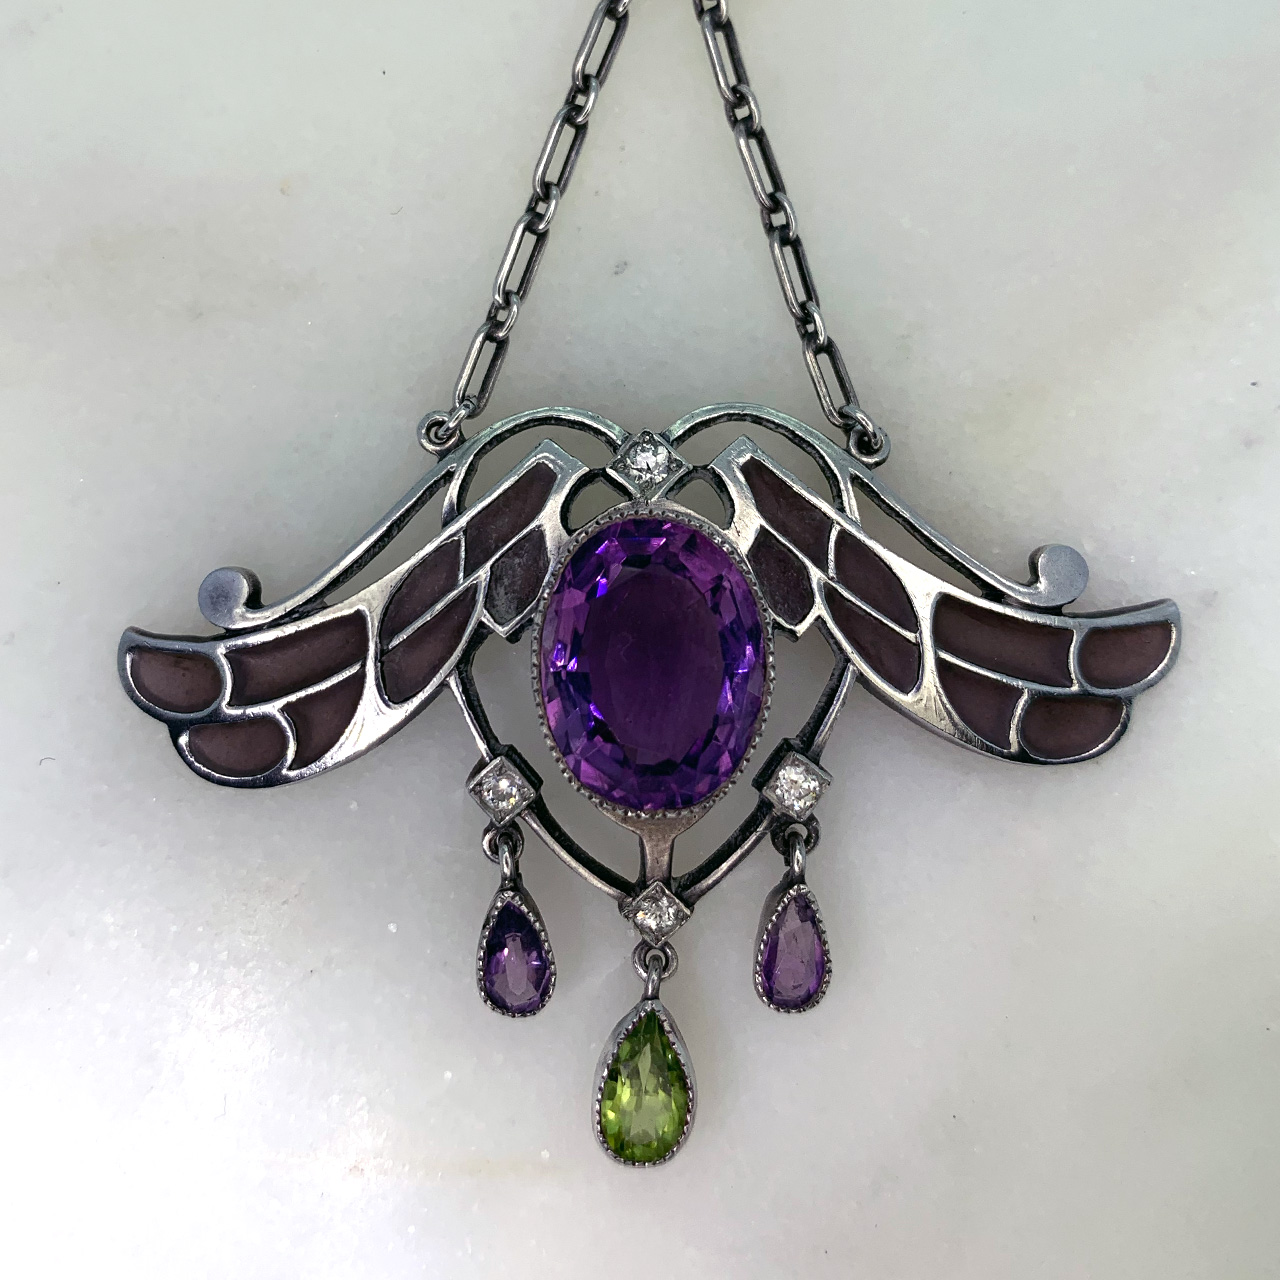 Exquisite Art Nouveau Silver Suffragette Pendant, set with Peridot, Amethysts and Diamonds. The central Amethyst measures approximately 13.3 mm x 10.8 mm, surrounded by four 3.8 mm diameter Diamonds, with three teardrop's hanging below (one Peridot, 2 Amethyst). All stones are rub-over set. The total pendant measures 50 mm x 70 mm (including the 33.50 mm chain and loop). On the back of the pendant is noted 'sterling'. 